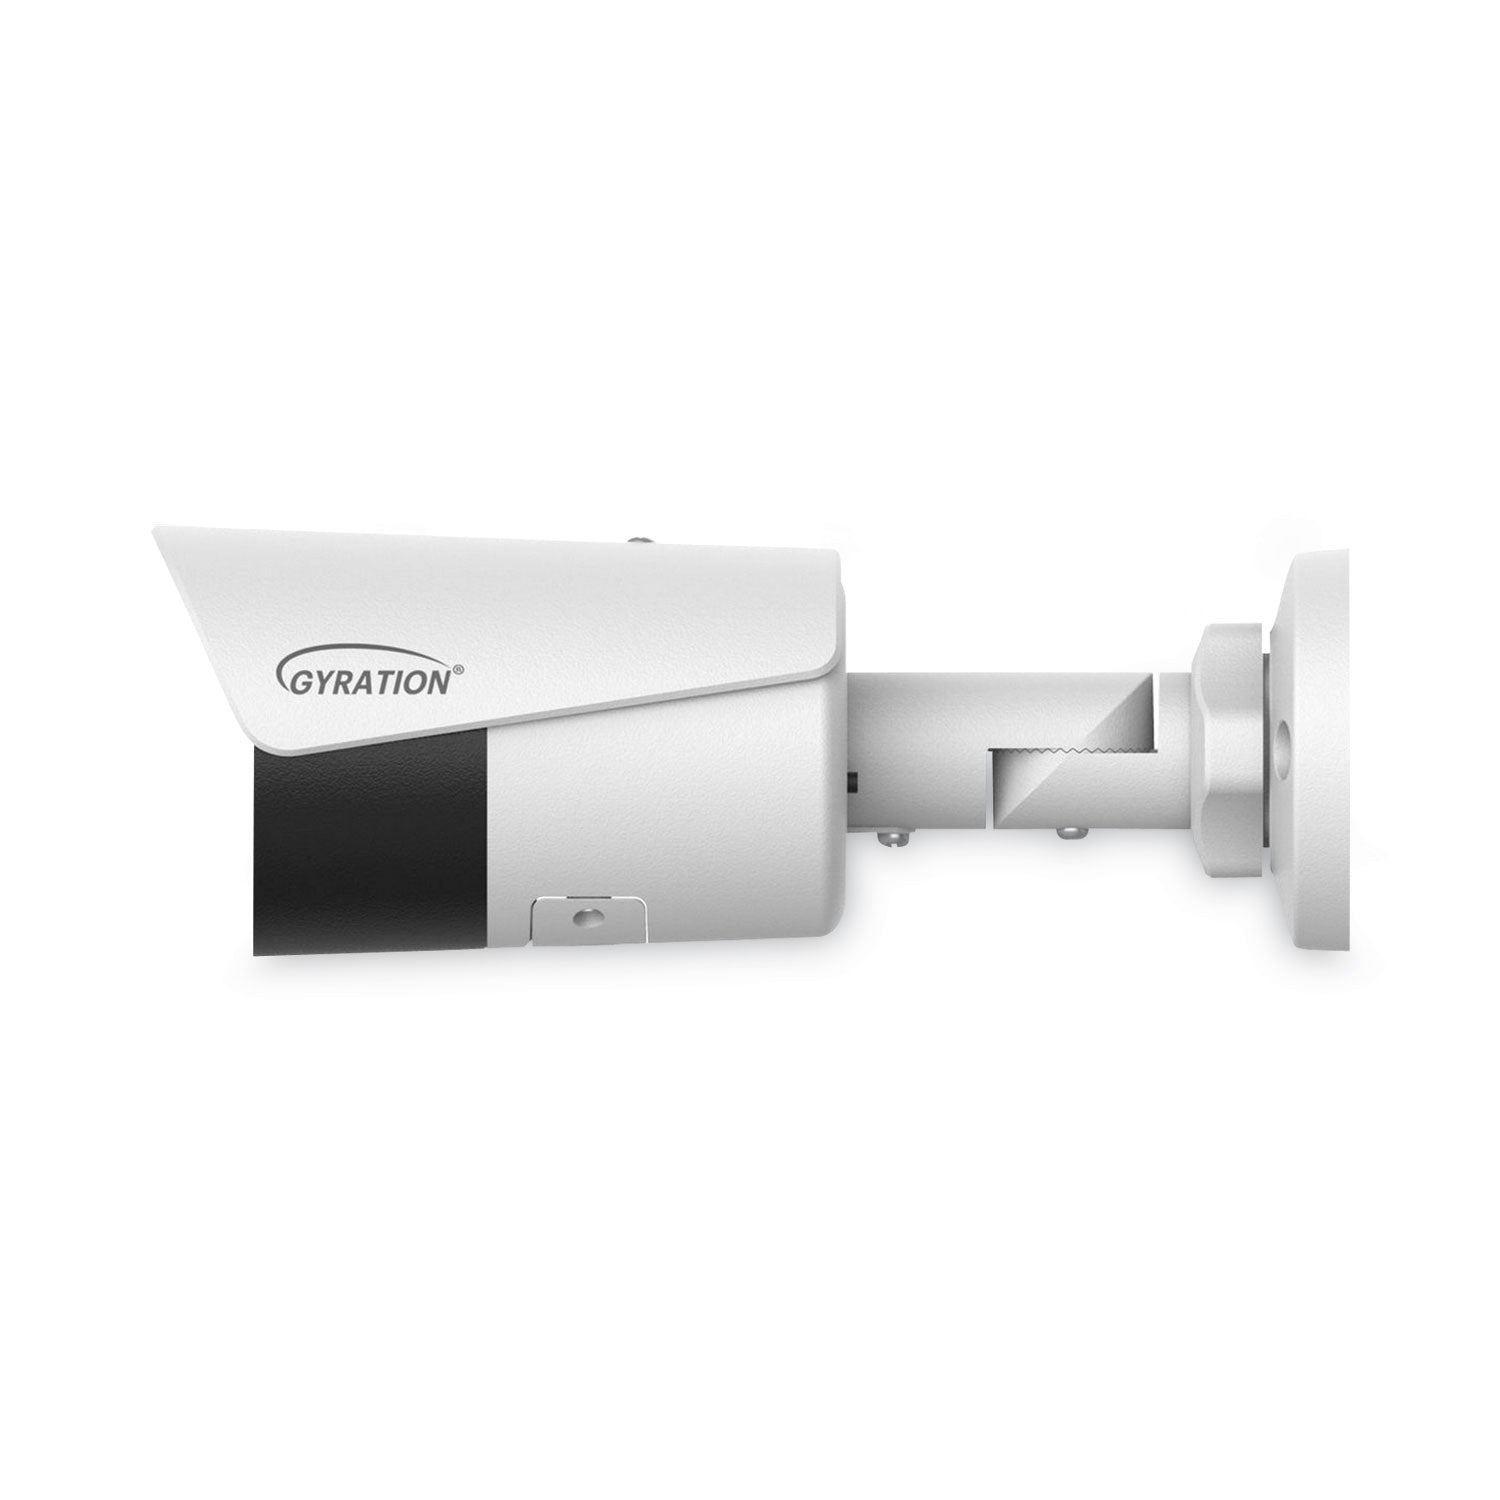 cyberview-400b-4-mp-outdoor-ir-fixed-bullet-camera_adecybrview400b - 4